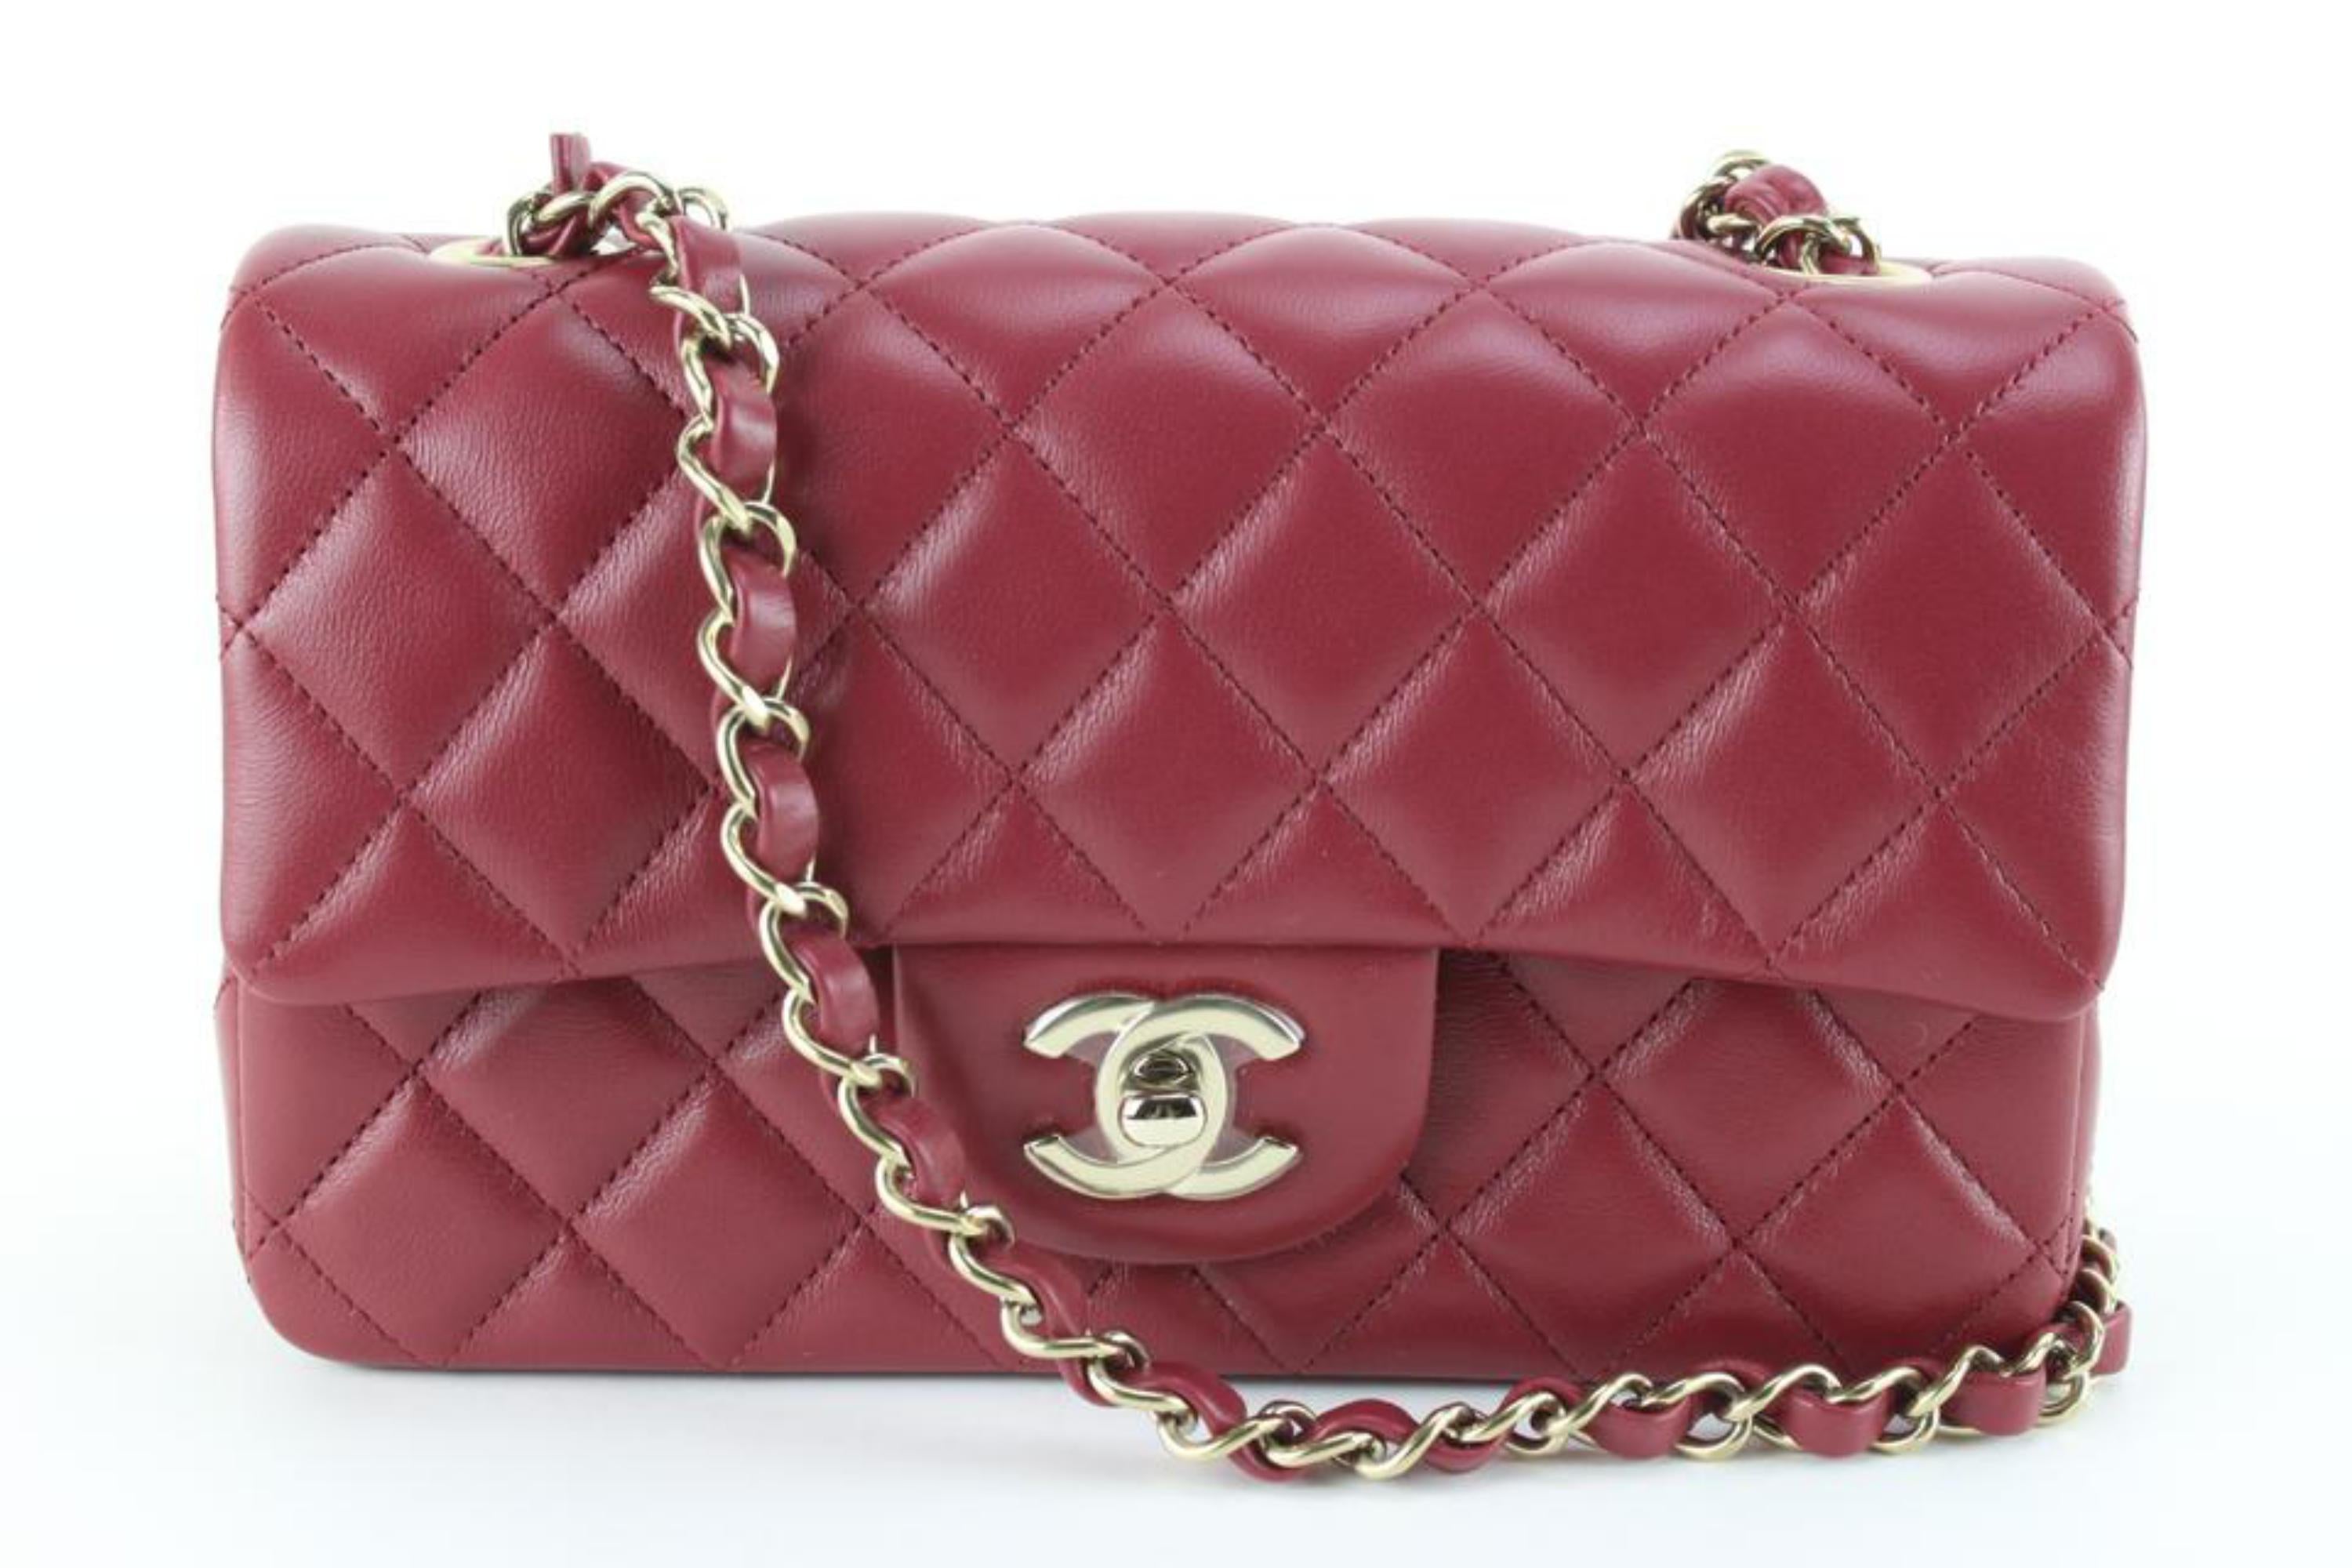 Chanel Red Lambskin Leather Medium Classic Double Flap Bag